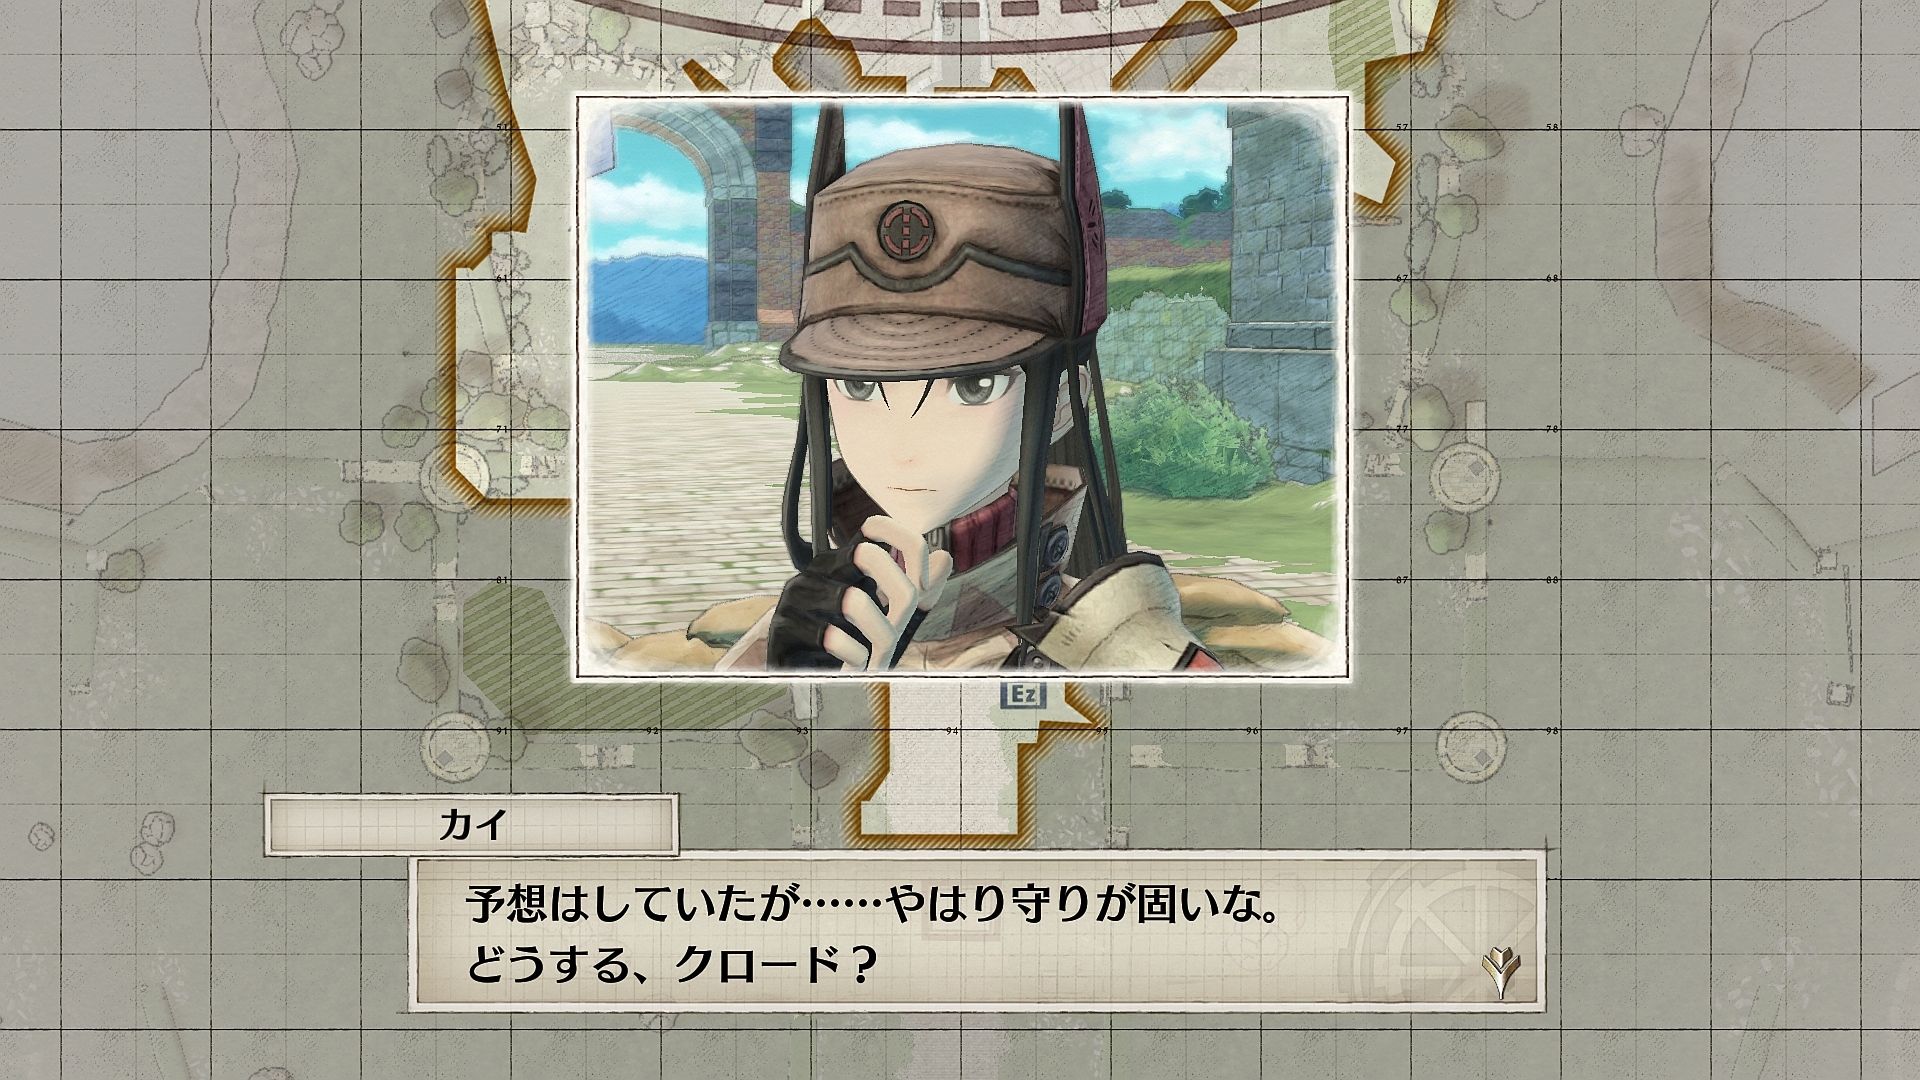 http://www.perfectly-nintendo.com/wp-content/gallery/valkyria-chronicles-4-27-12-2017/24.jpg